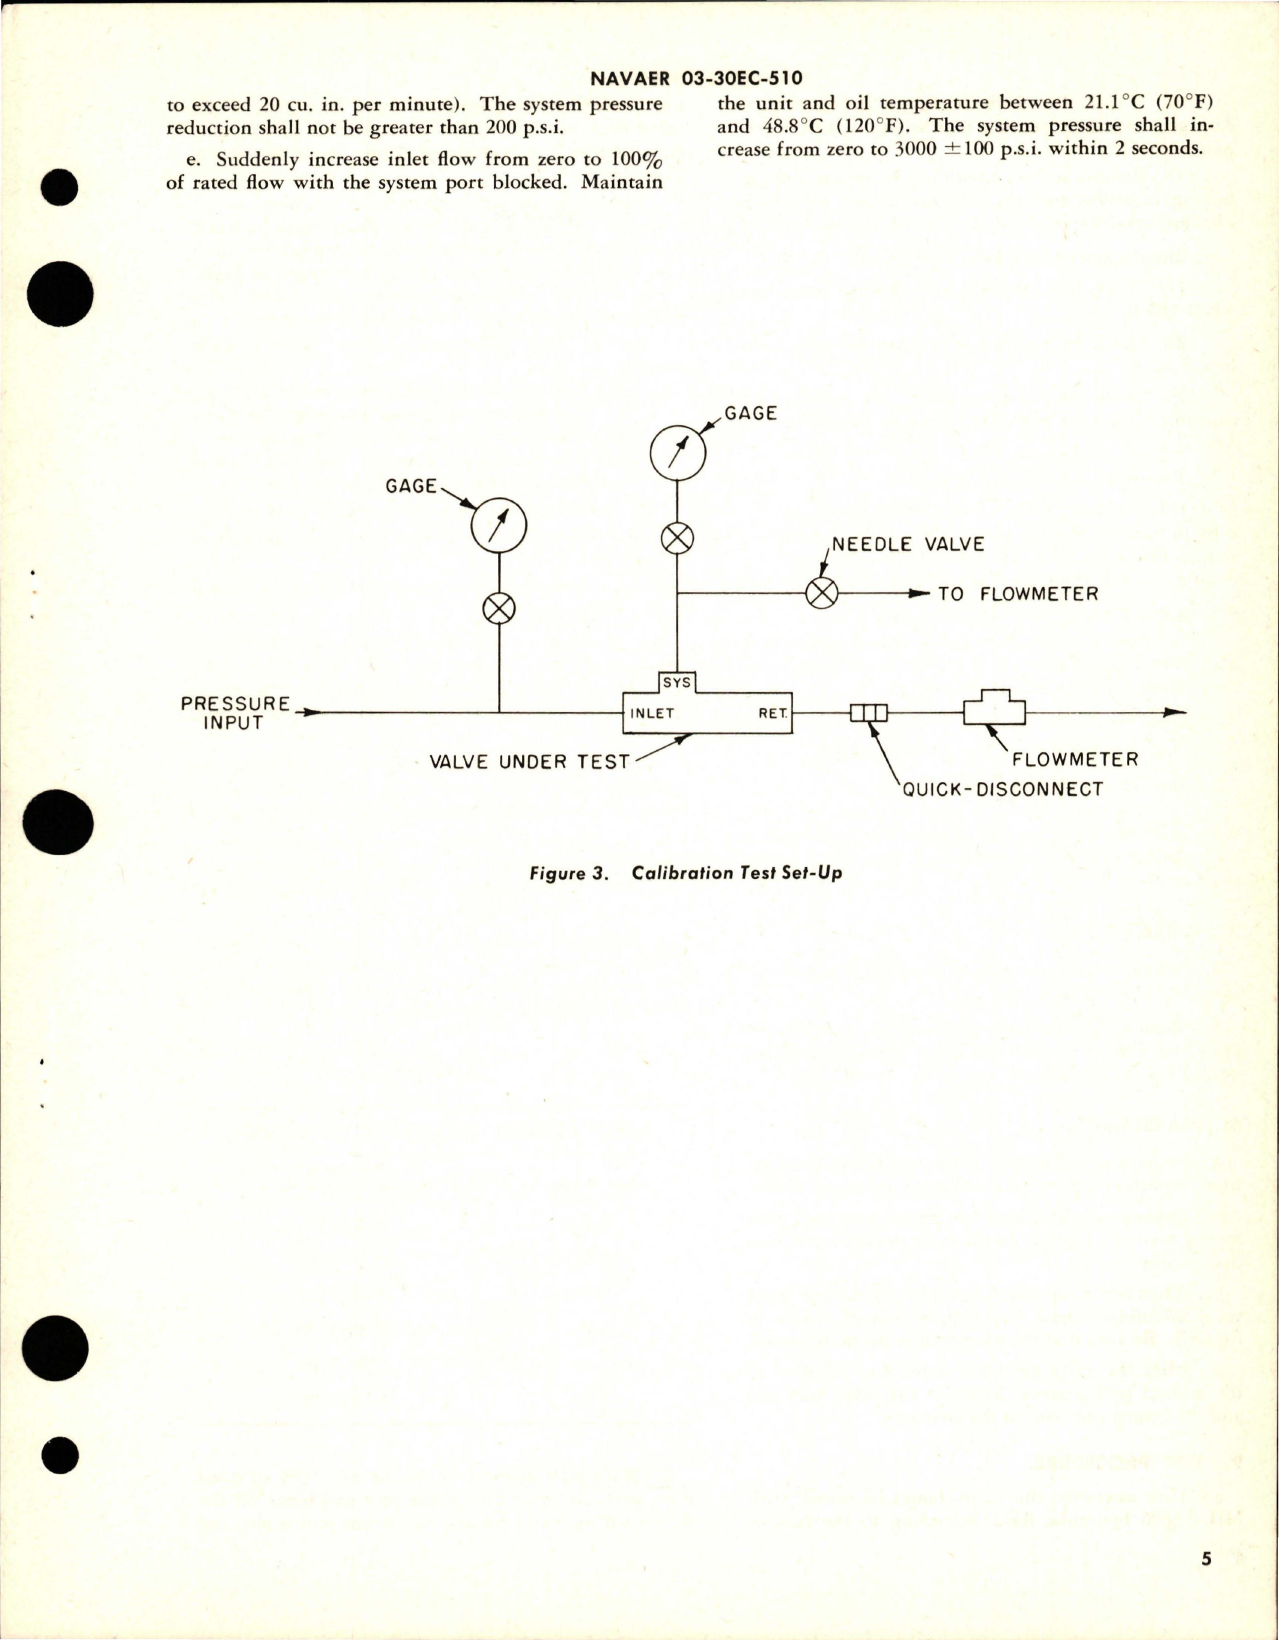 Sample page 5 from AirCorps Library document: Overhaul Instructions with Parts for Hydraulic Flow Sensitive Pressure Regulator Valve - AFS-6-07